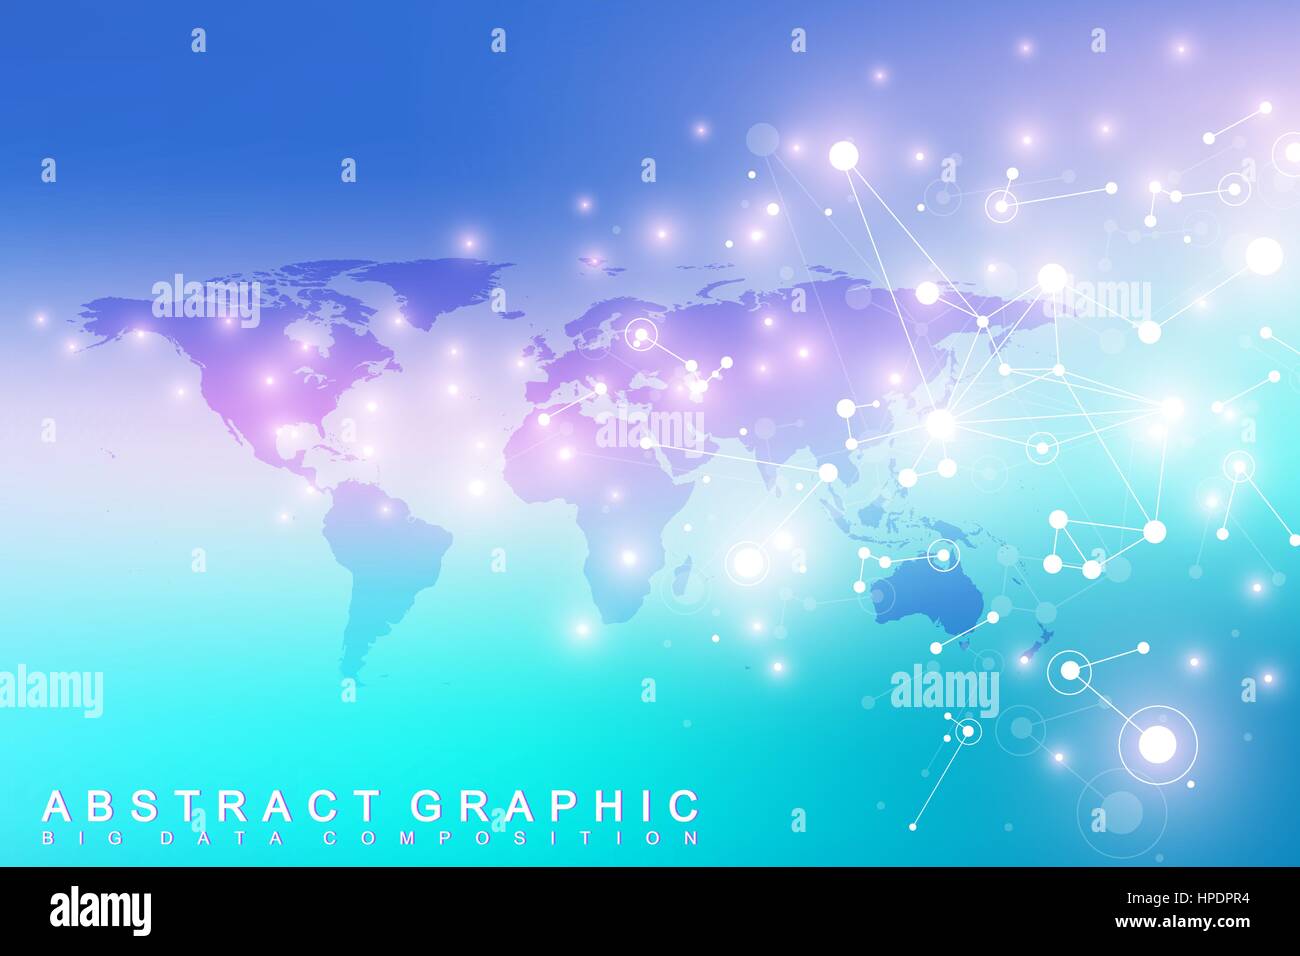 Political World Map with global technology networking concept. Digital data visualization. Lines plexus. Big Data background communication. Scientific vector illustration. Stock Vector